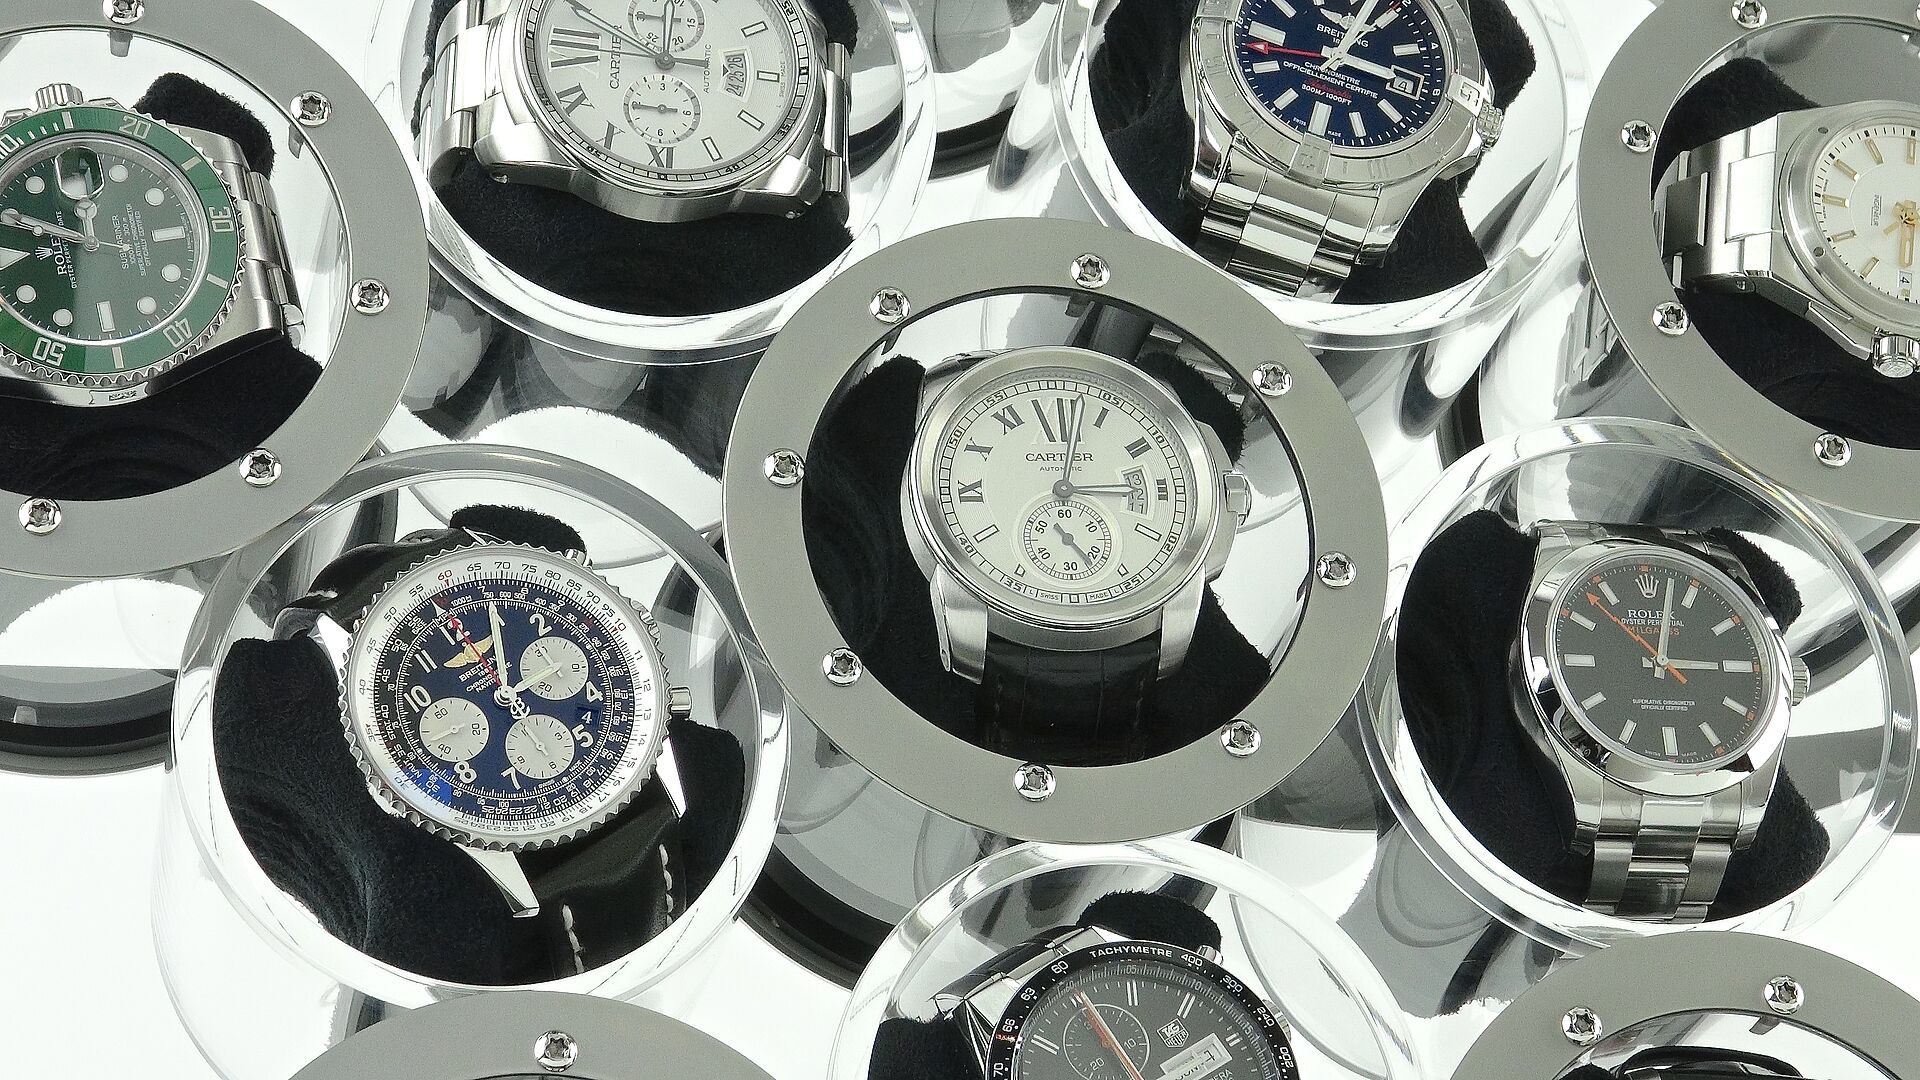 Constant and interlocking movement of the watches